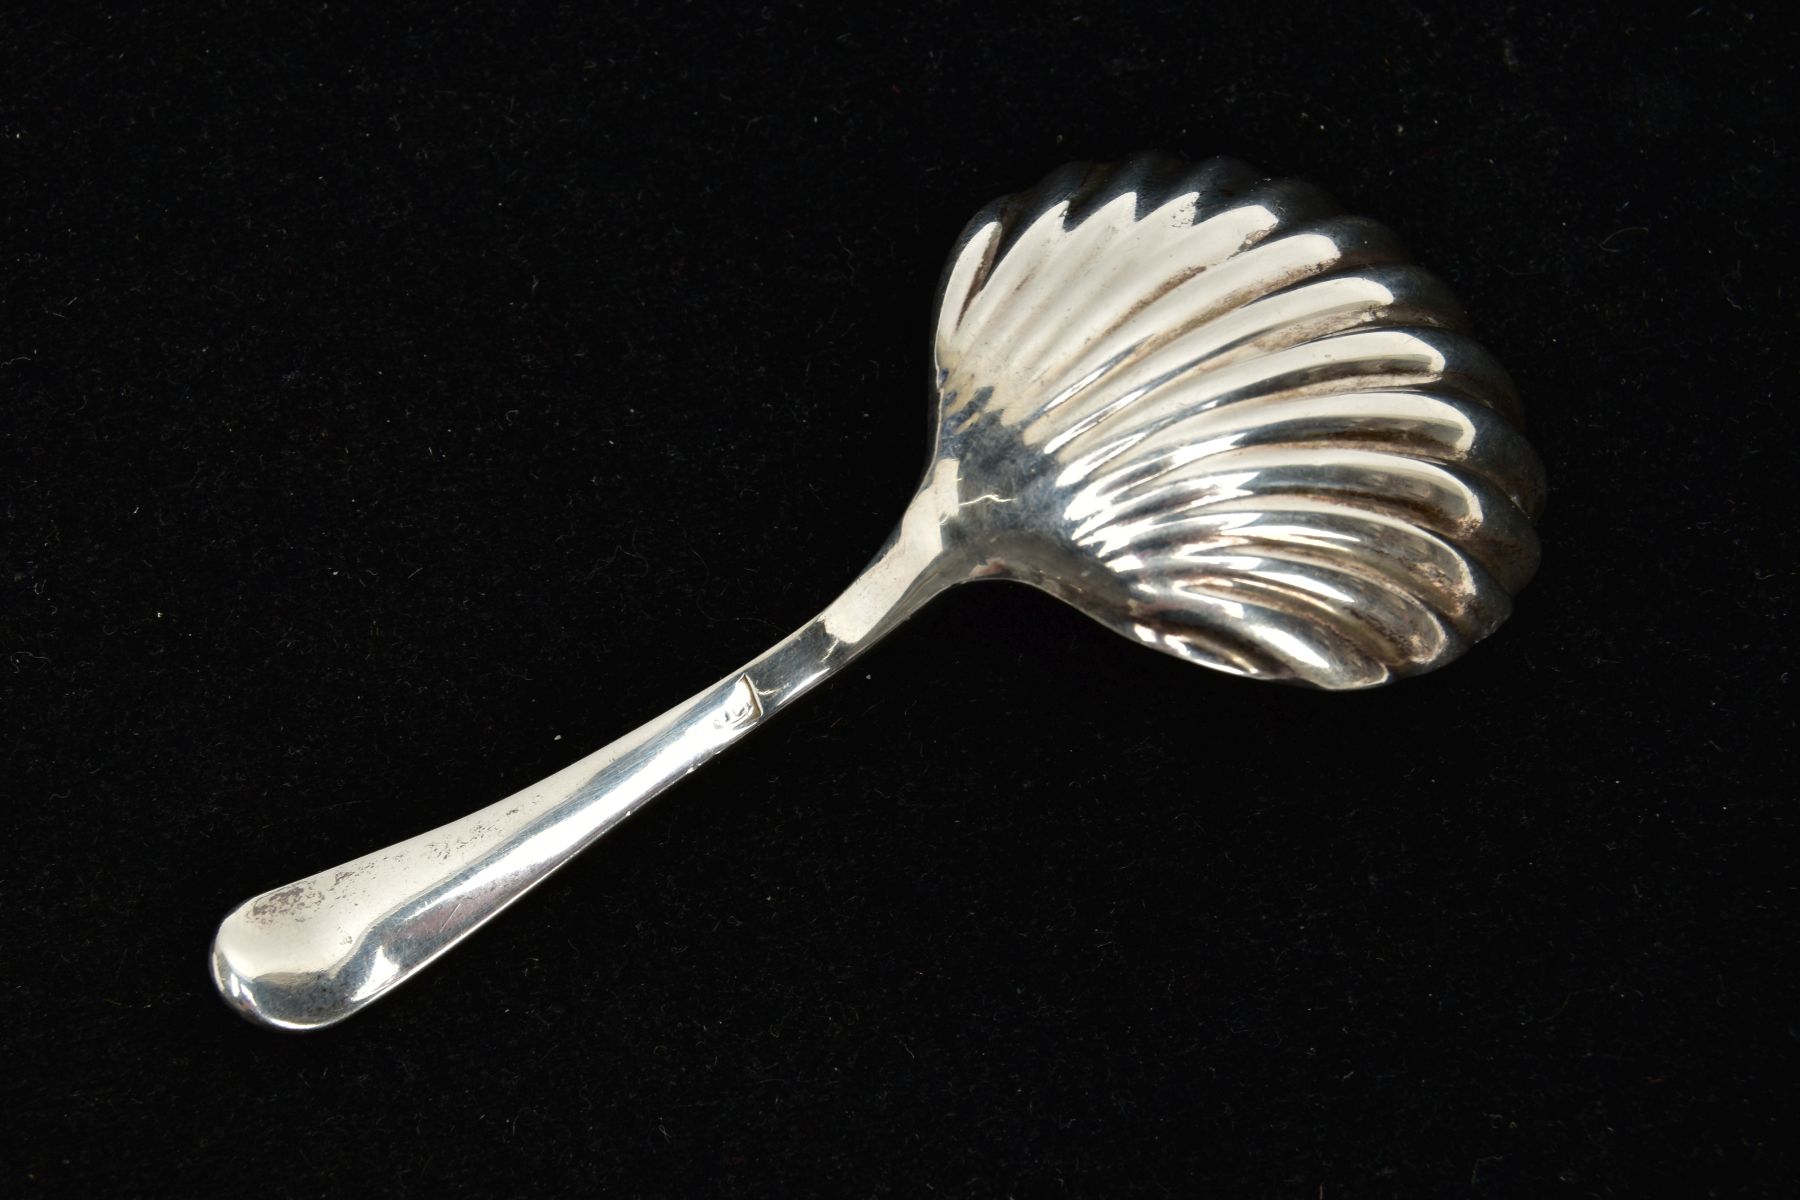 A SILVER COLOURED METAL CADDY SPOON, engraved M.G.B in memory of C.G to the front of the handle, - Image 2 of 3